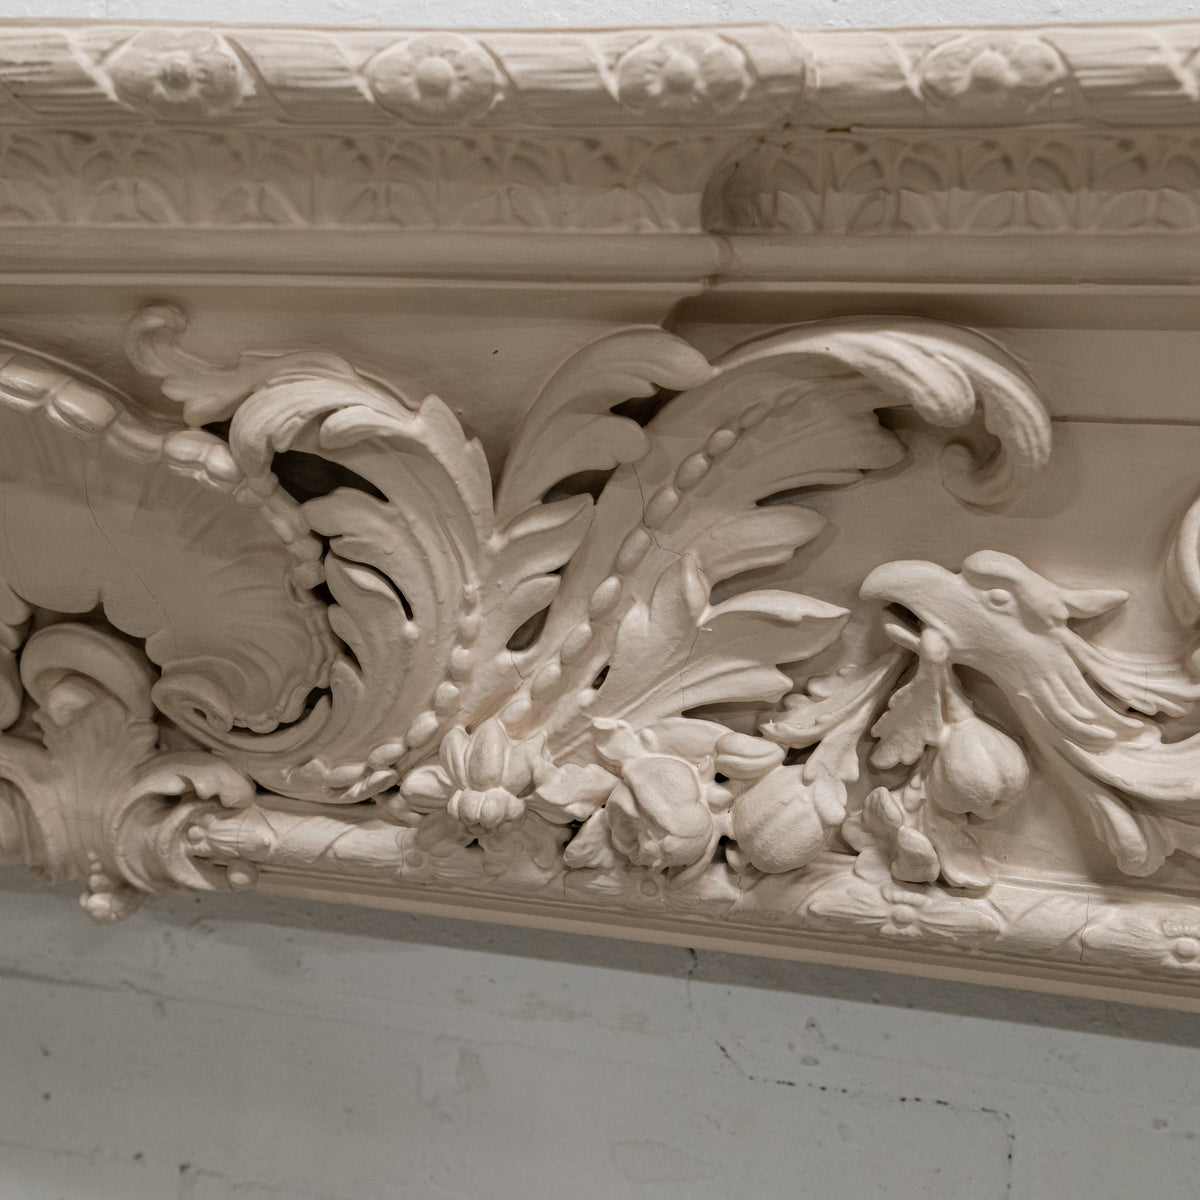 Antique Rococo Style Carved Wood &amp; Gesso Surround | The Architectural Forum